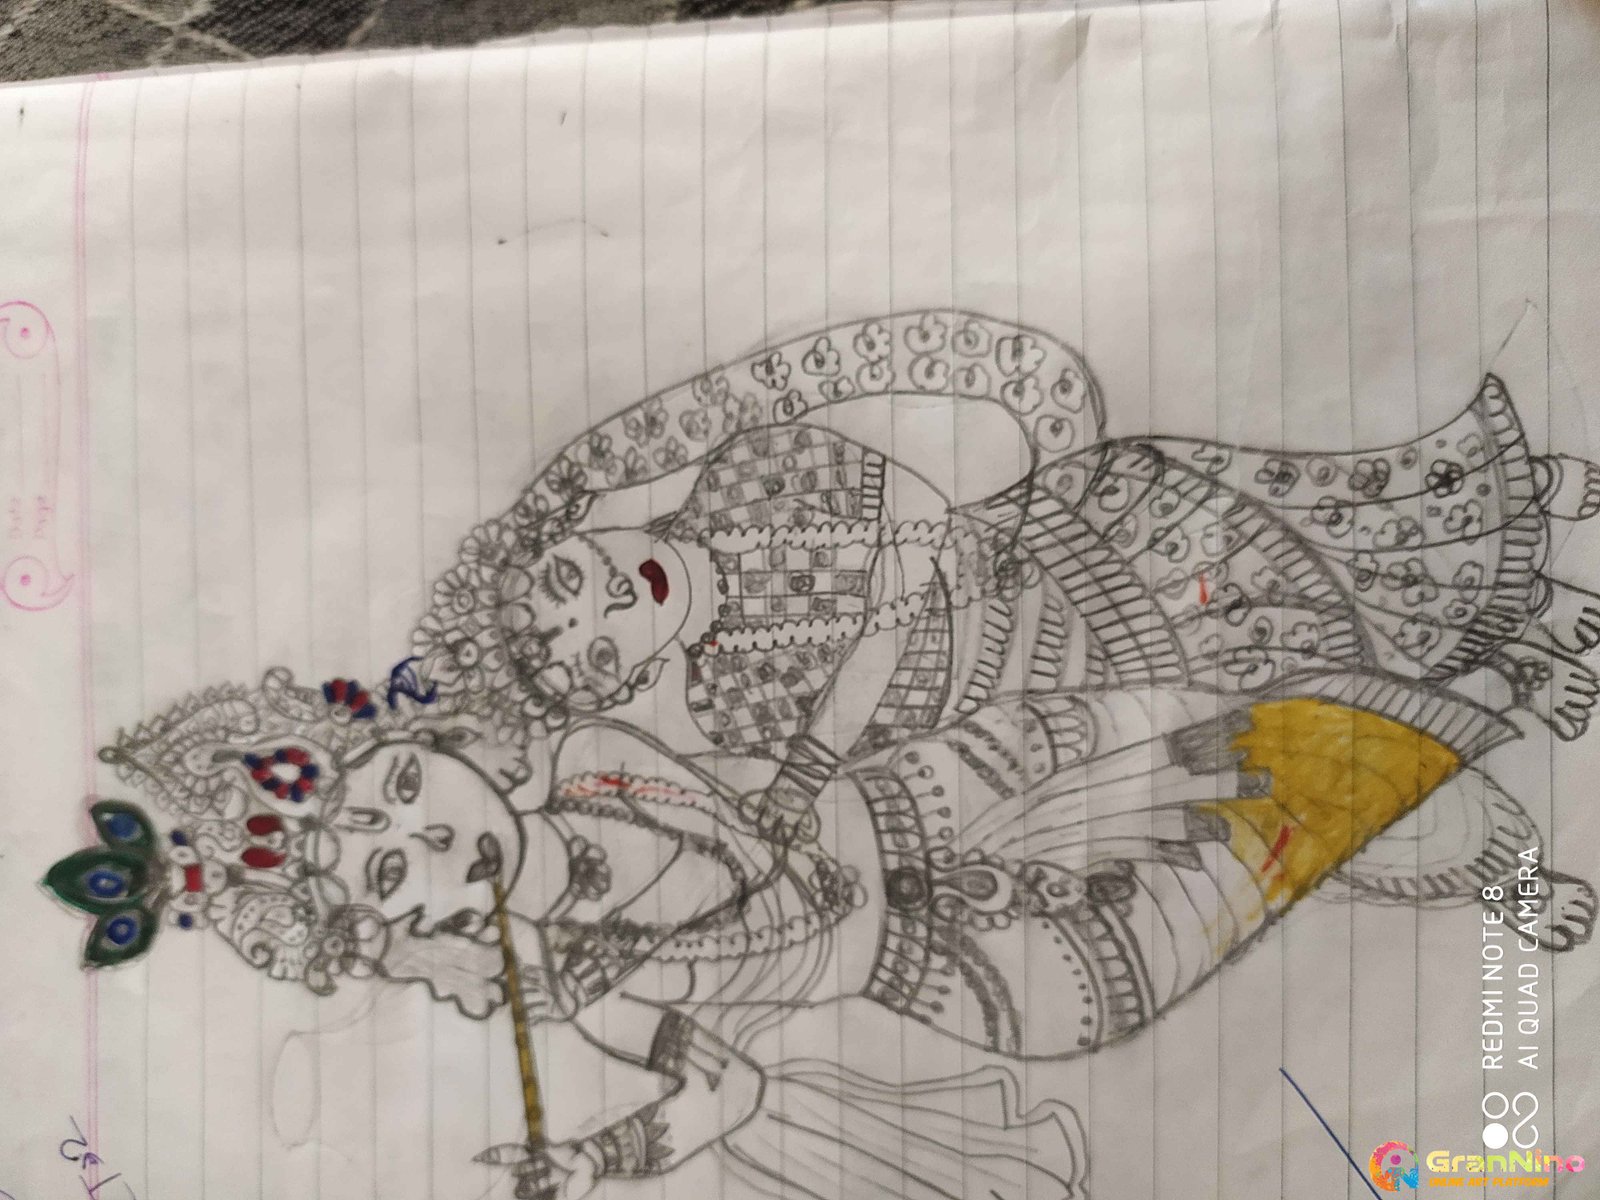 Great Pencil Sketch Of Lord Krishna By Bhavesh S Mane - Desi Painters